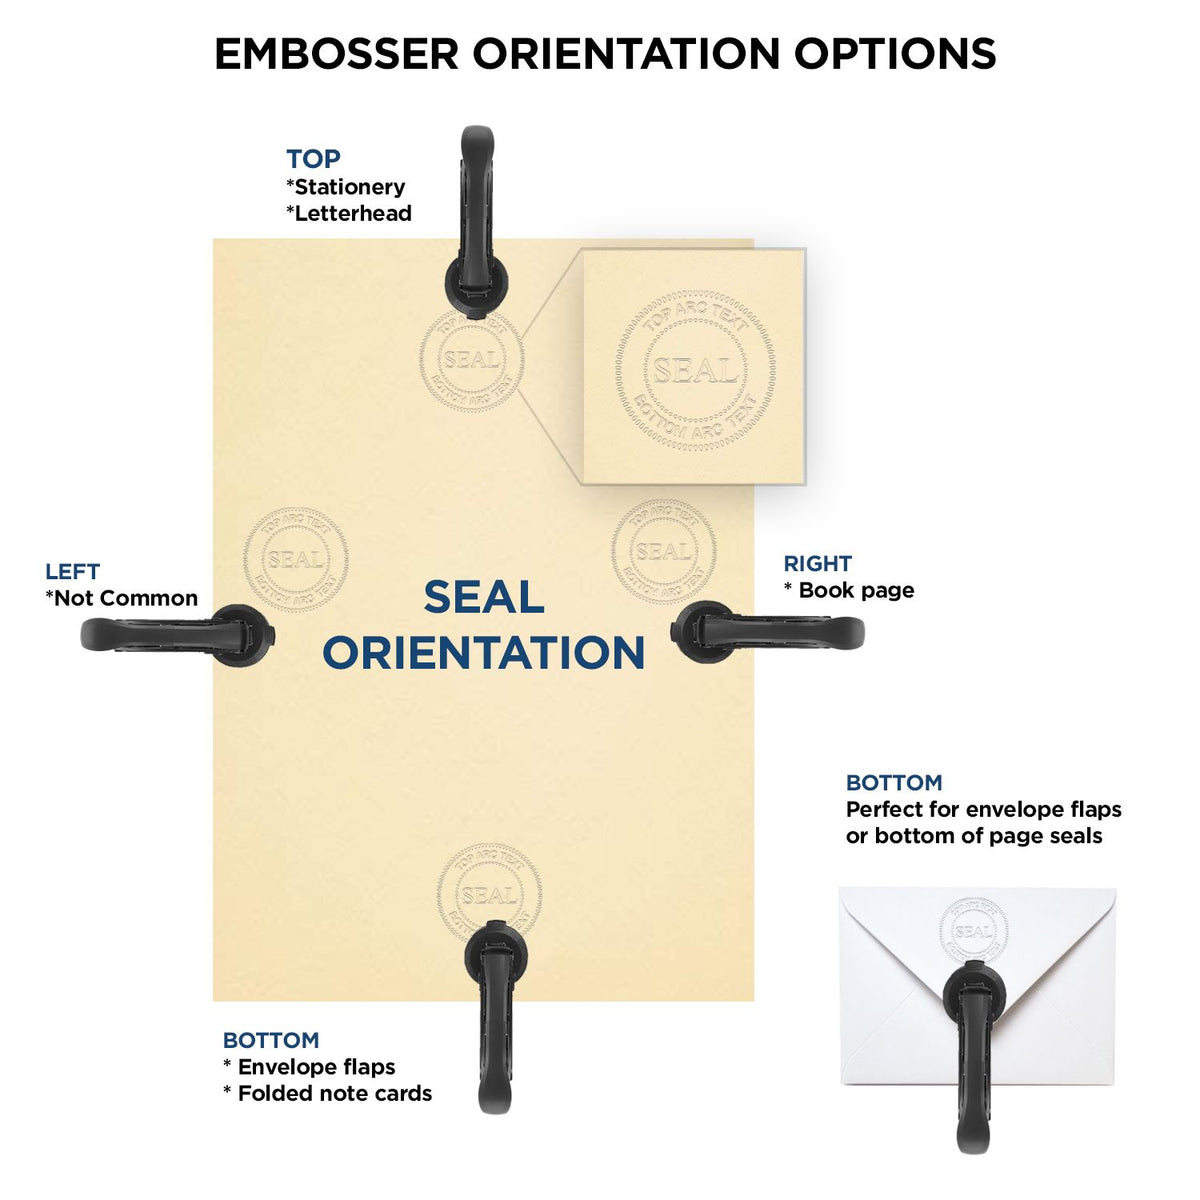 An infographic for the Virginia Engineer Desk Seal showing embosser orientation, this is showing examples of a top, bottom, right and left insert.